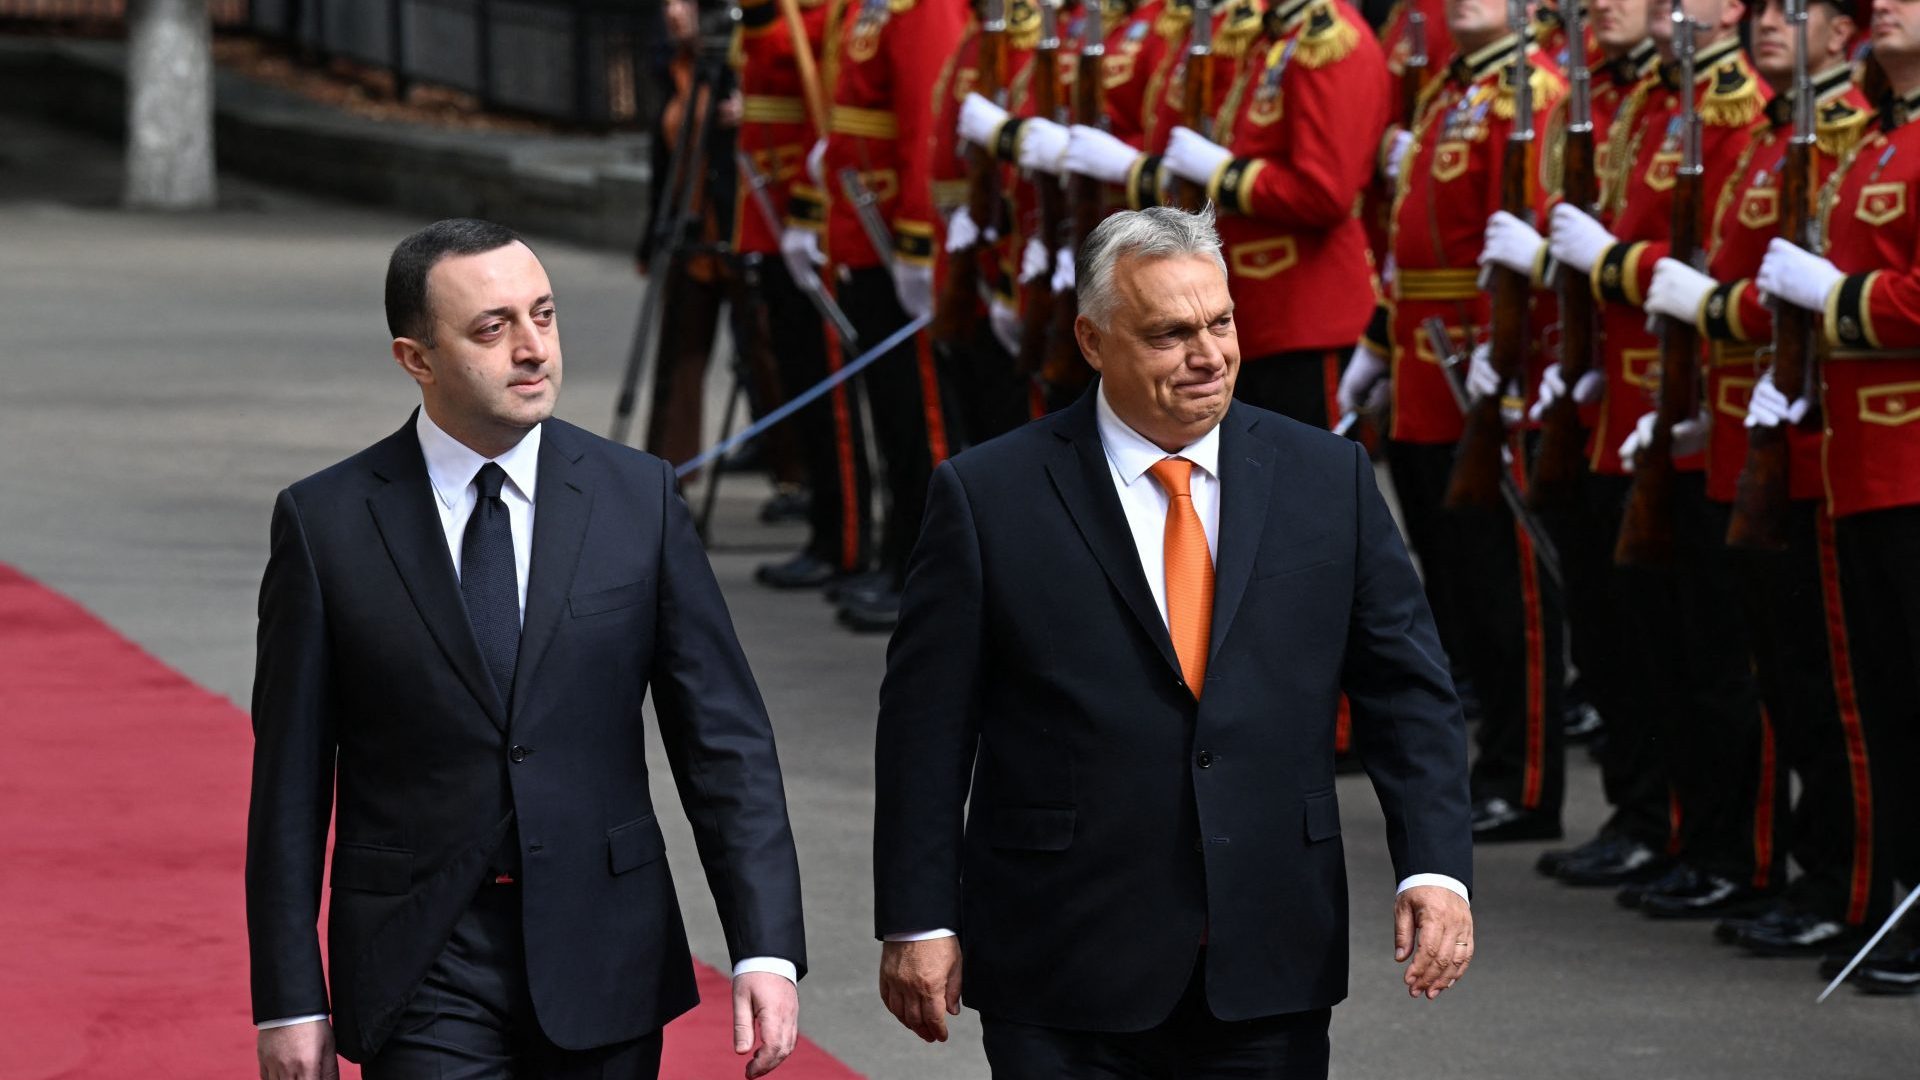 Georgian Prime Minister Irakli Garibashvili and visiting Hungary's Prime Minister Viktor Orban attend a welcoming ceremony in Tbilisi. Photo: VANO SHLAMOV/AFP via Getty Images